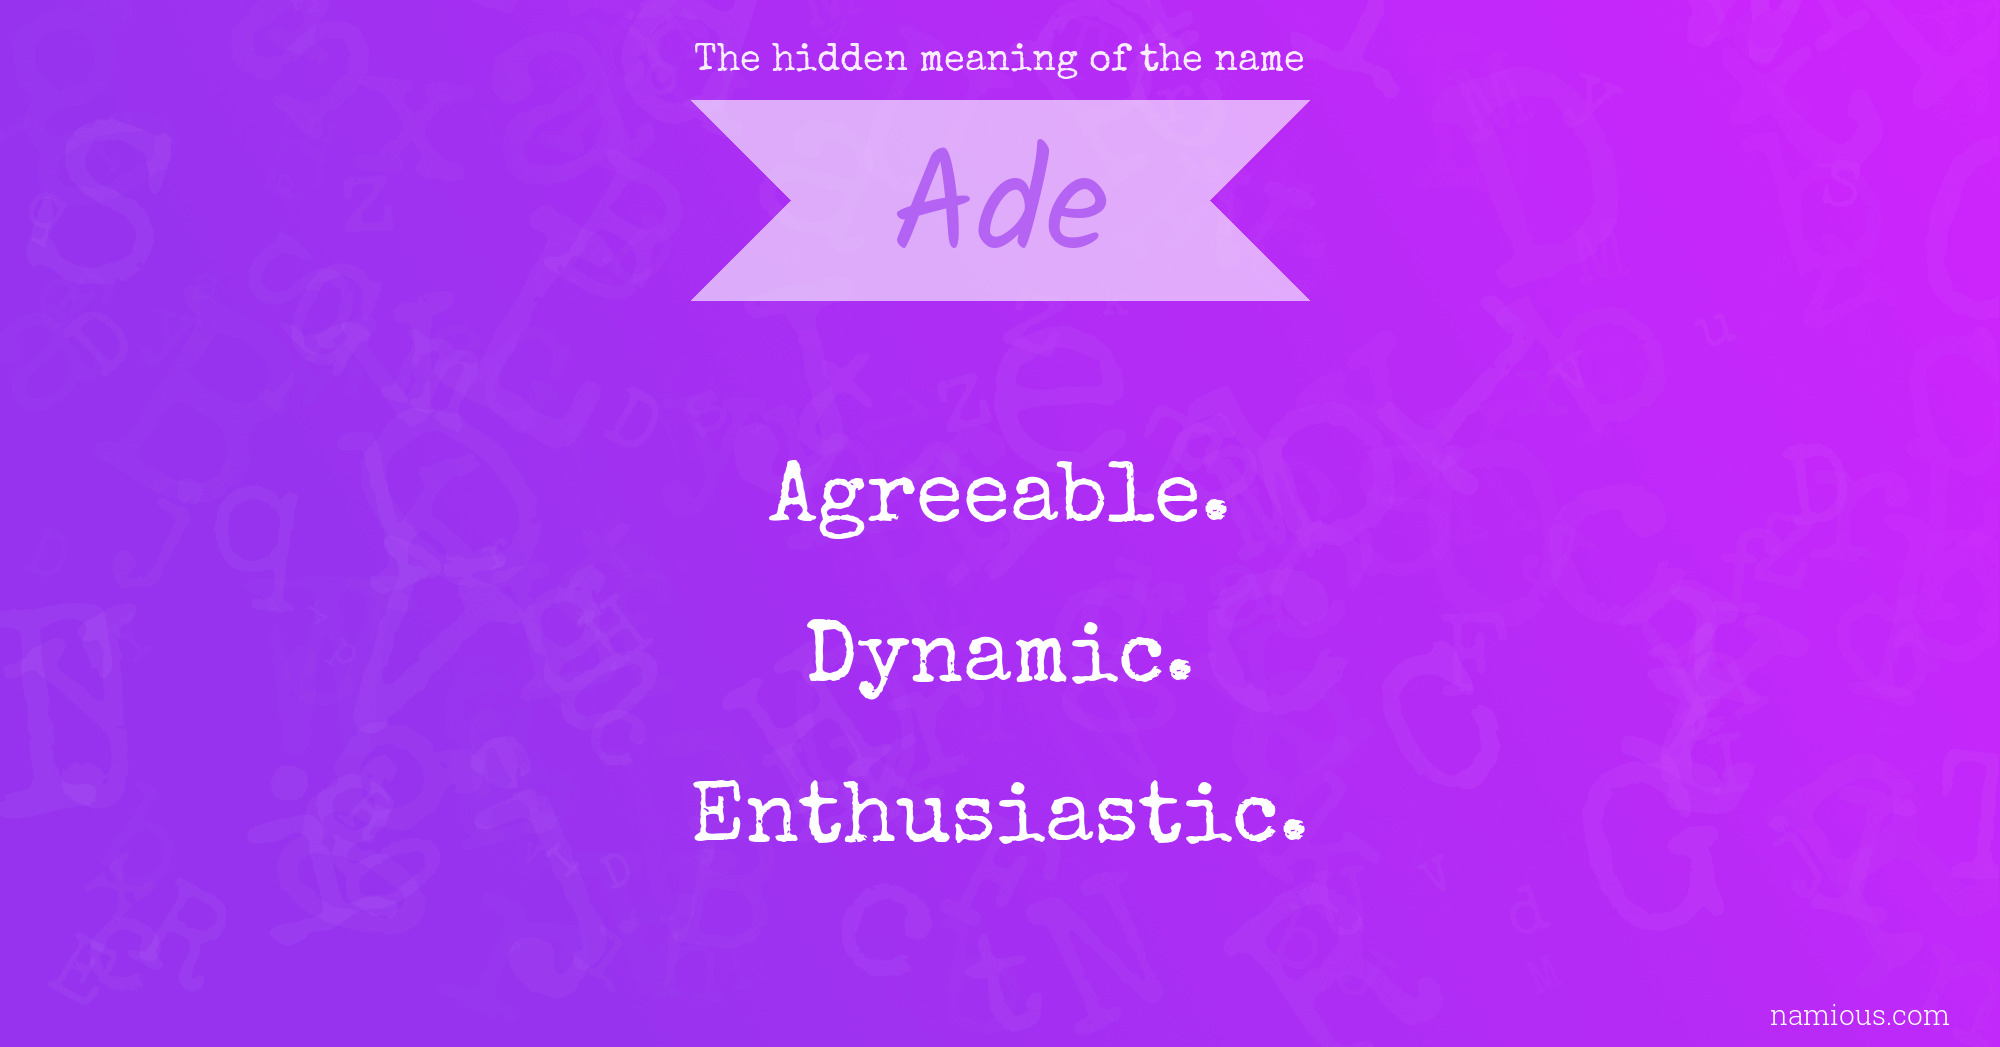 The hidden meaning of the name Ade